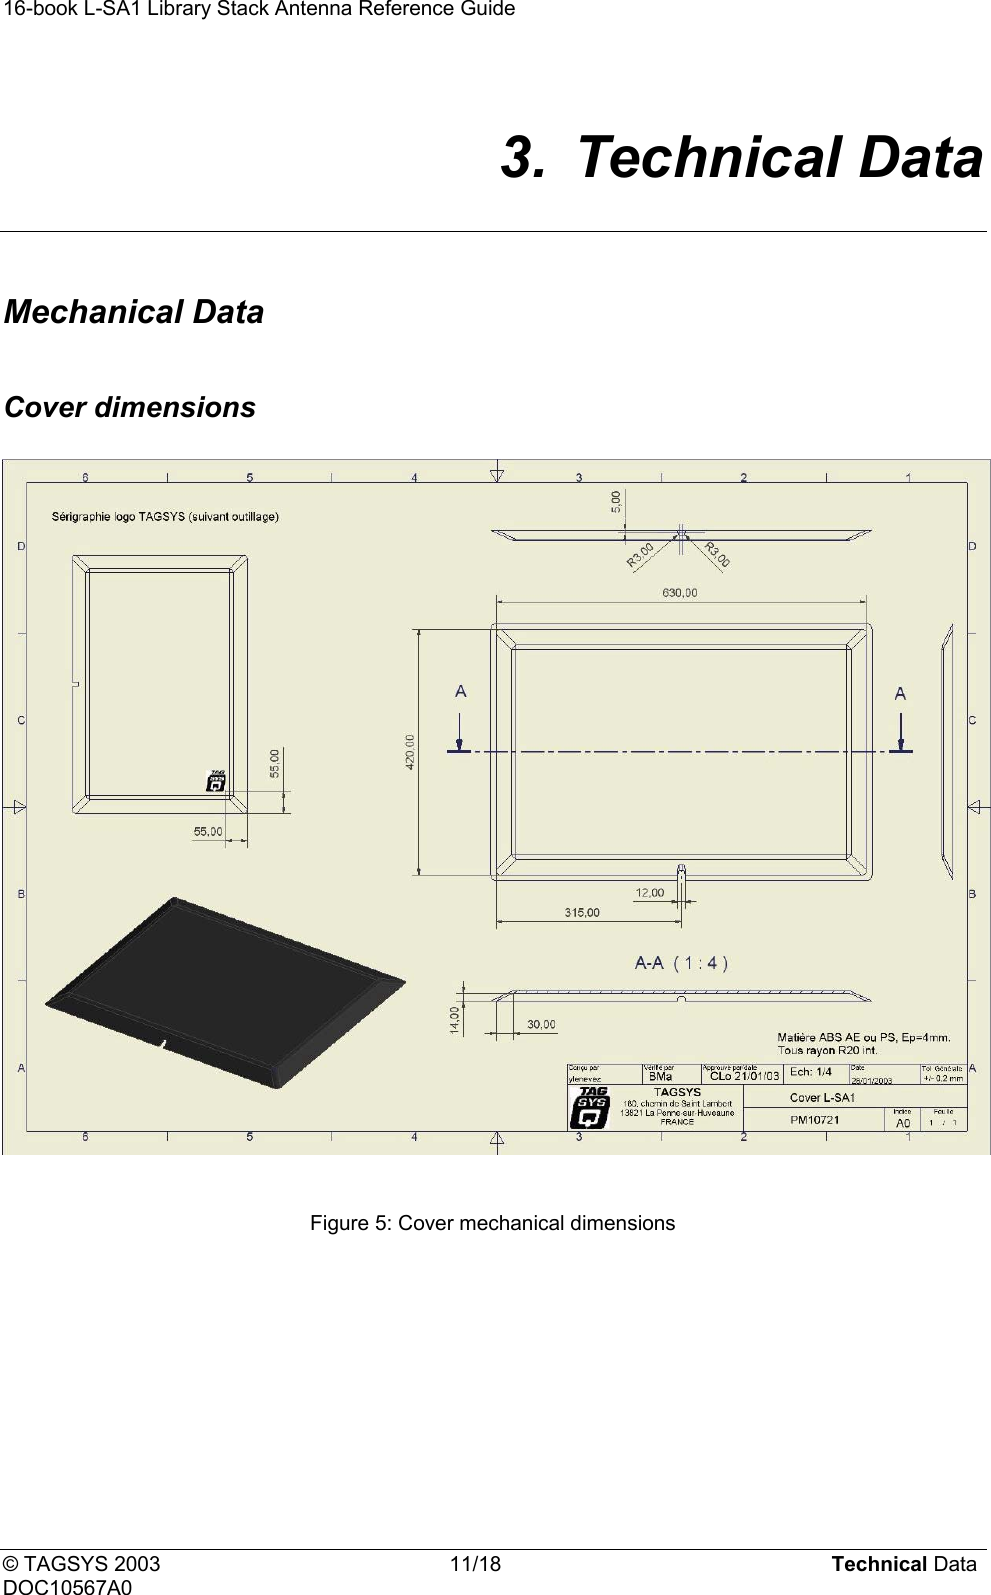 16-book L-SA1 Library Stack Antenna Reference Guide      3. Technical Data  Mechanical Data  Cover dimensions     Figure 5: Cover mechanical dimensions           © TAGSYS 2003  11/18  Technical Data DOC10567A0 